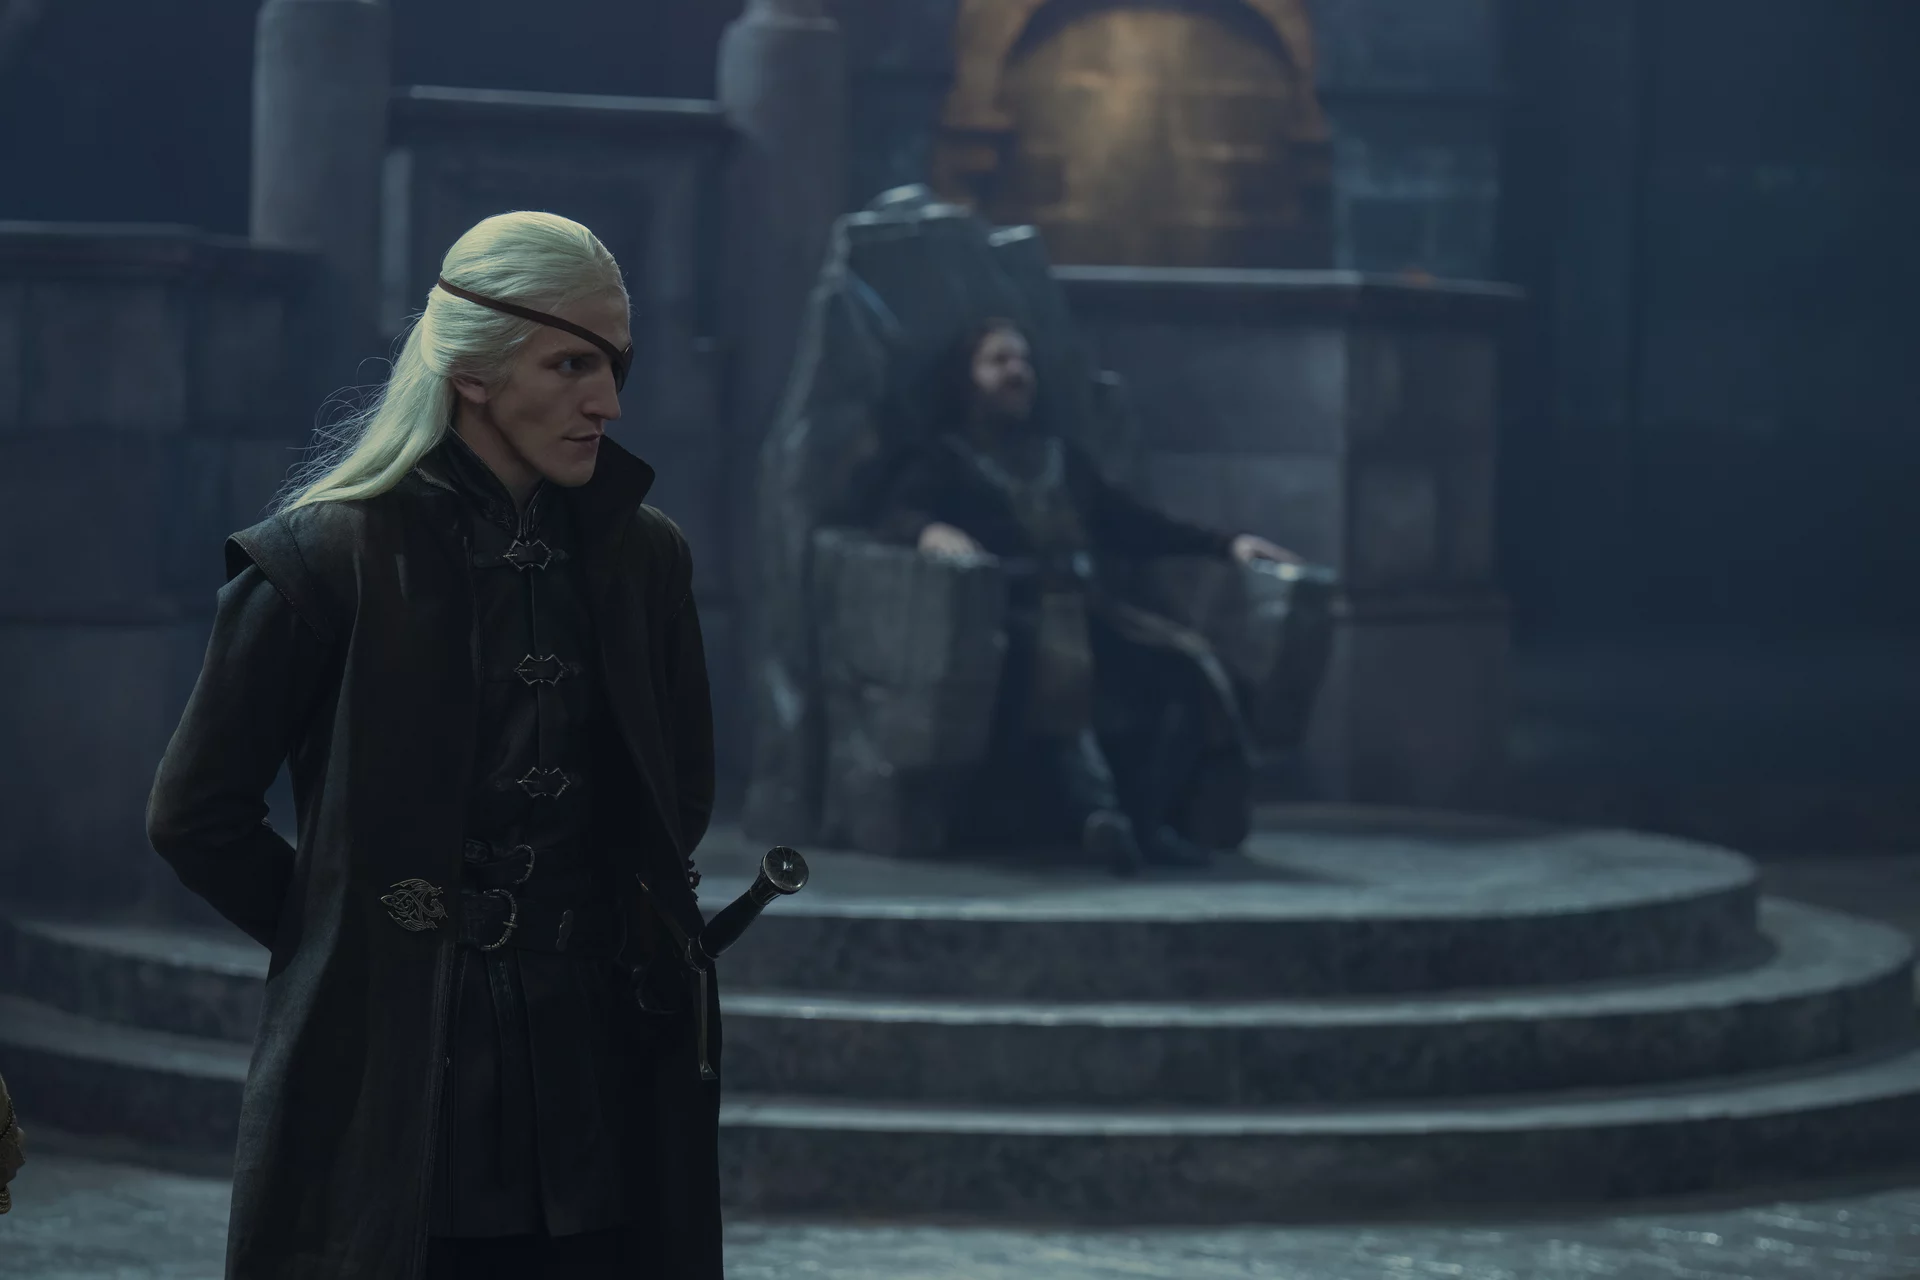 Aemon with his eyepatch to the left. King Baratheon behind him.